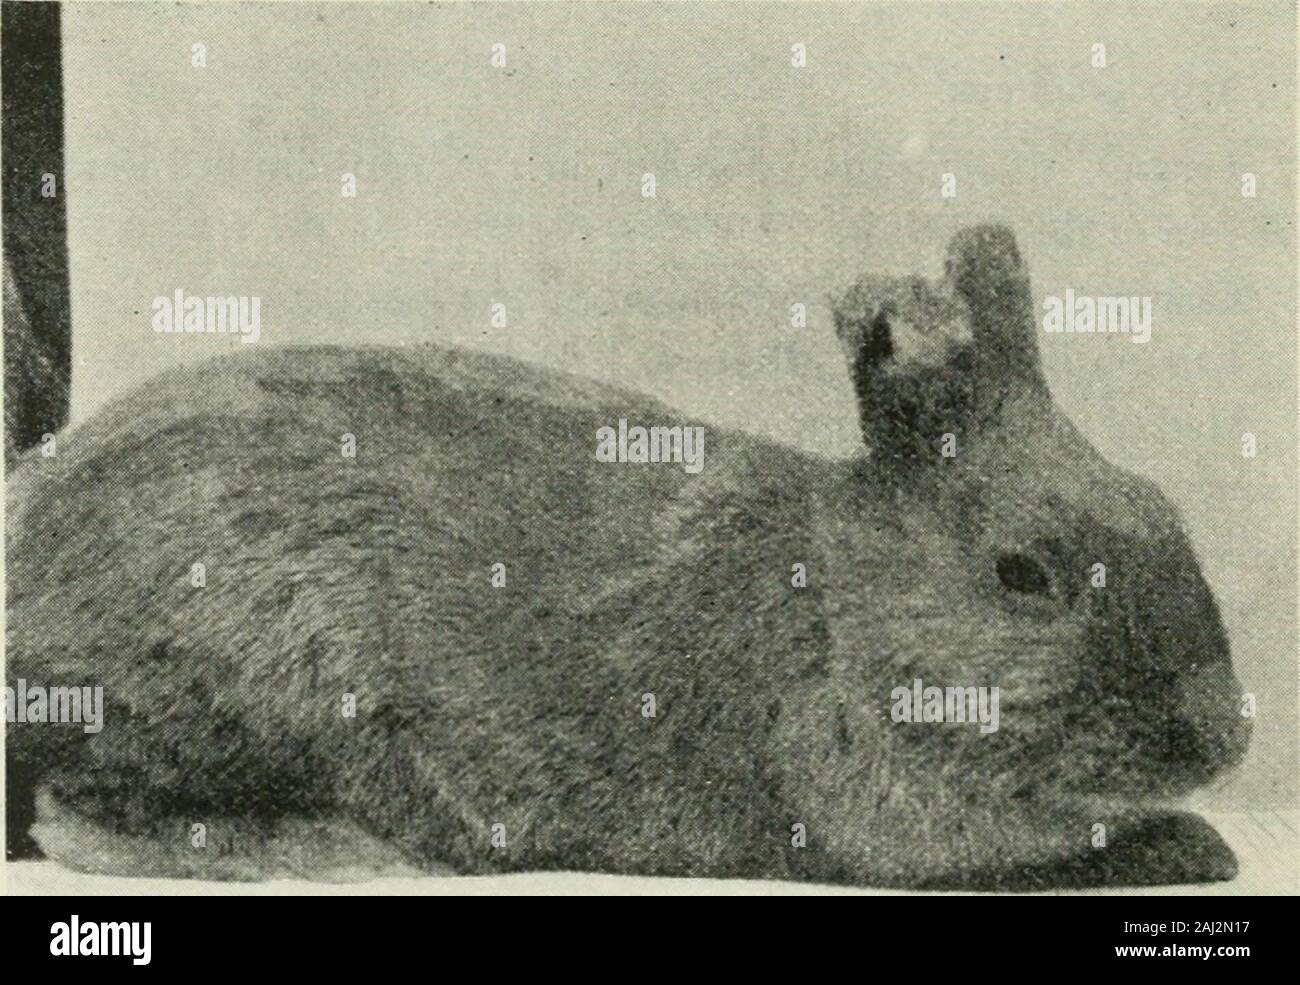 The Biochemical journal, 1907 . this connexion, that Zutz (36), with a commercial specimenof Cornutin citrate, observed no rise of temperature in a guinea-pig, which, after aninjection of 10 mgms., recovered in ij hours. (2) Rabbit, 1410 grammes. 12.4 p.m. I mgm. of ergotoxine phosphate dissolved in 0*5 c.c. of distilled water injected into right ear-vein.12.12 p m. No symptoms except very rapid respiration and prominence of the eye-balls.1.10 p.m. Respiration still rapid. Jerky movements begin.2.0 p.m. Recovered. (3). Rabbit, 1420 grammes. 11.55 ^-n^- 2 mgms. ergotoxine, dissolved in I c.c. d Stock Photo